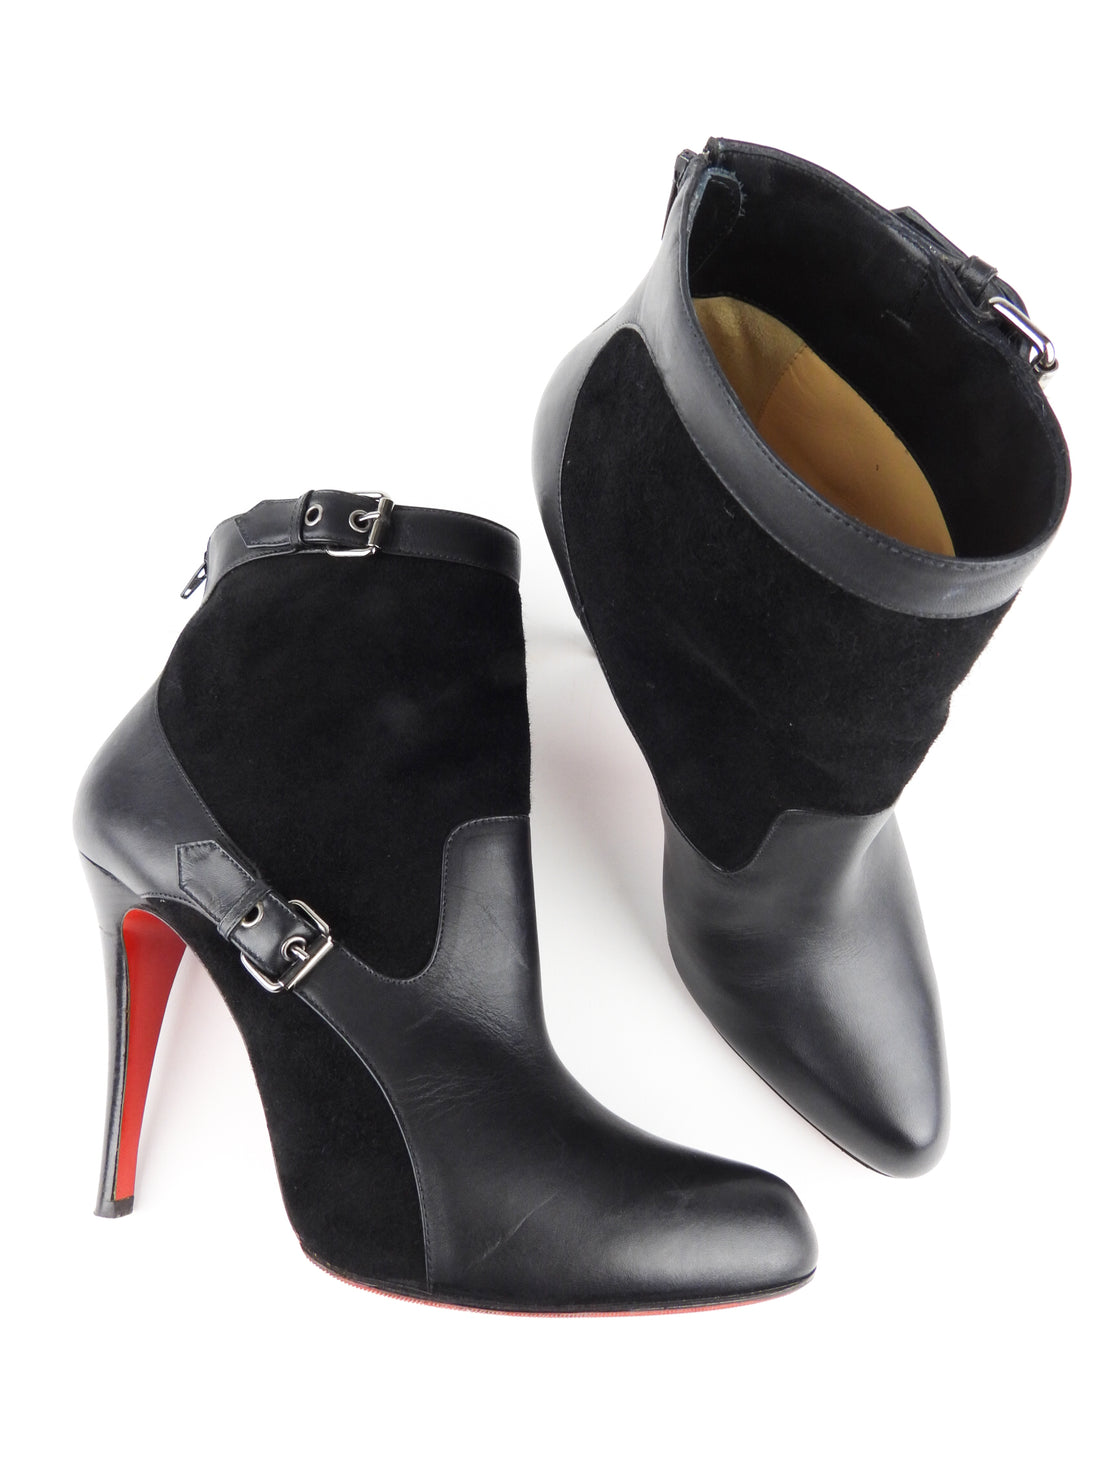 Christian Louboutin Black Suede and Leather Ankle Boot - 41